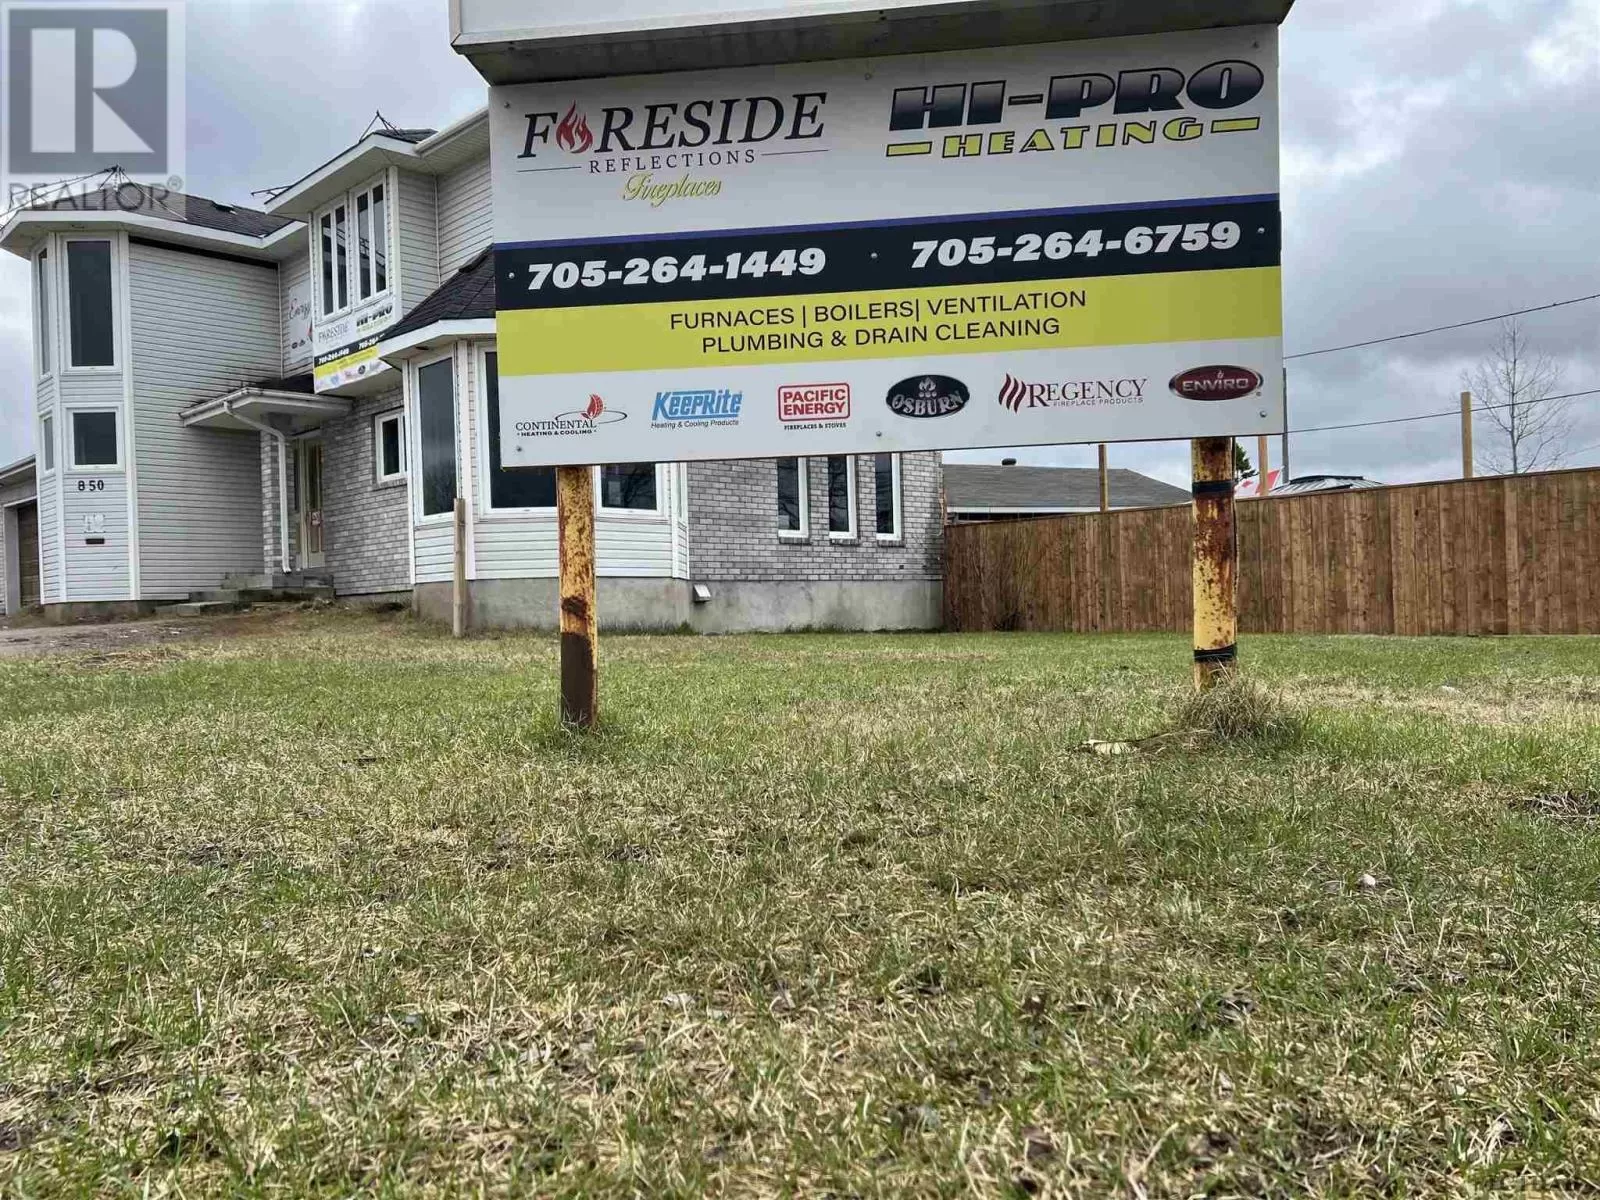 850 Tony Ave|fireside Reflections, Timmins, Ontario P4N 8R7